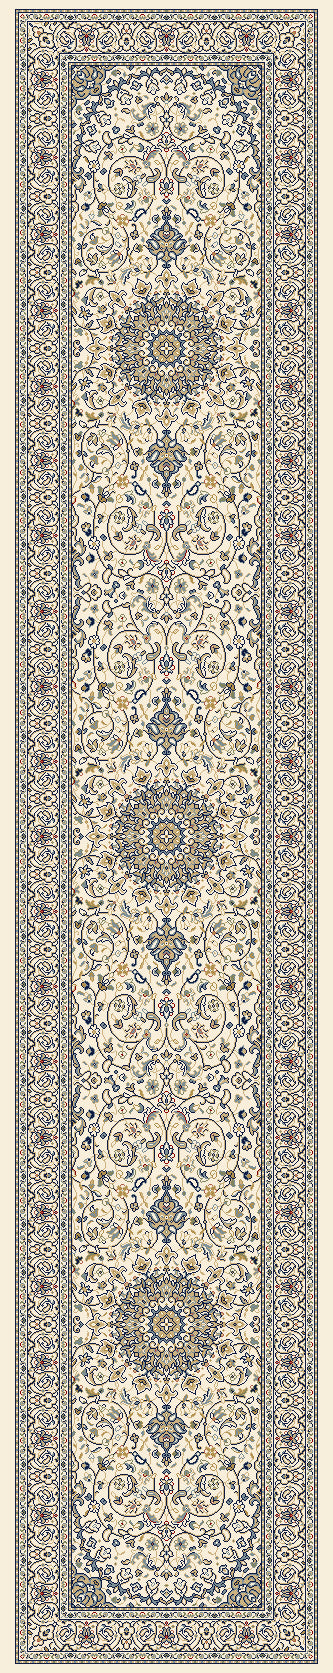 Dynamic Rugs Ancient Garden 57119-6464 Ivory Area Rug